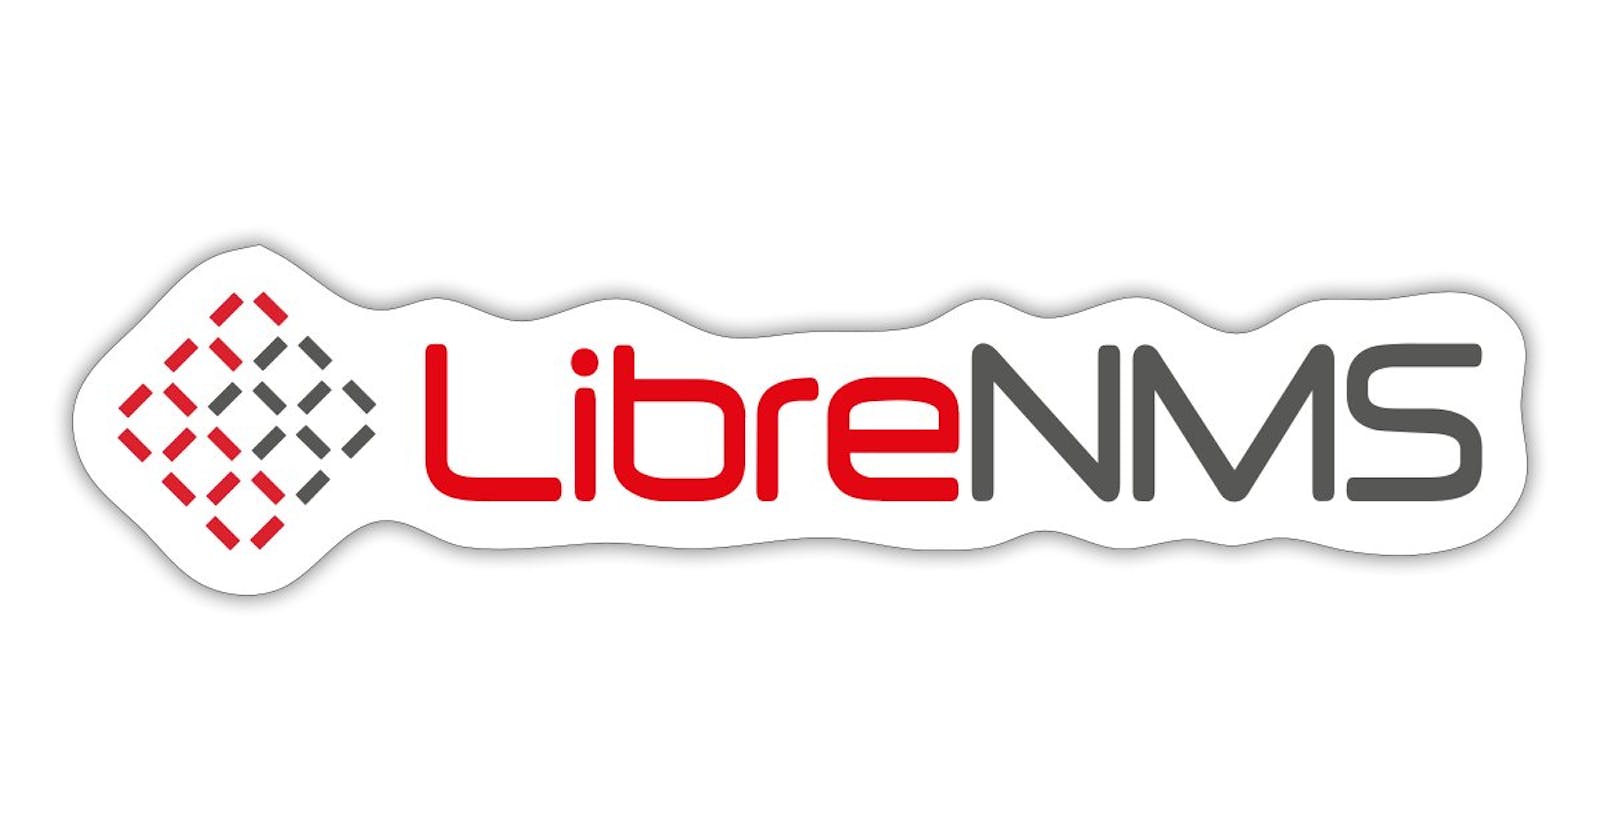 Why you SHOULD integrate LibreNMS into your network